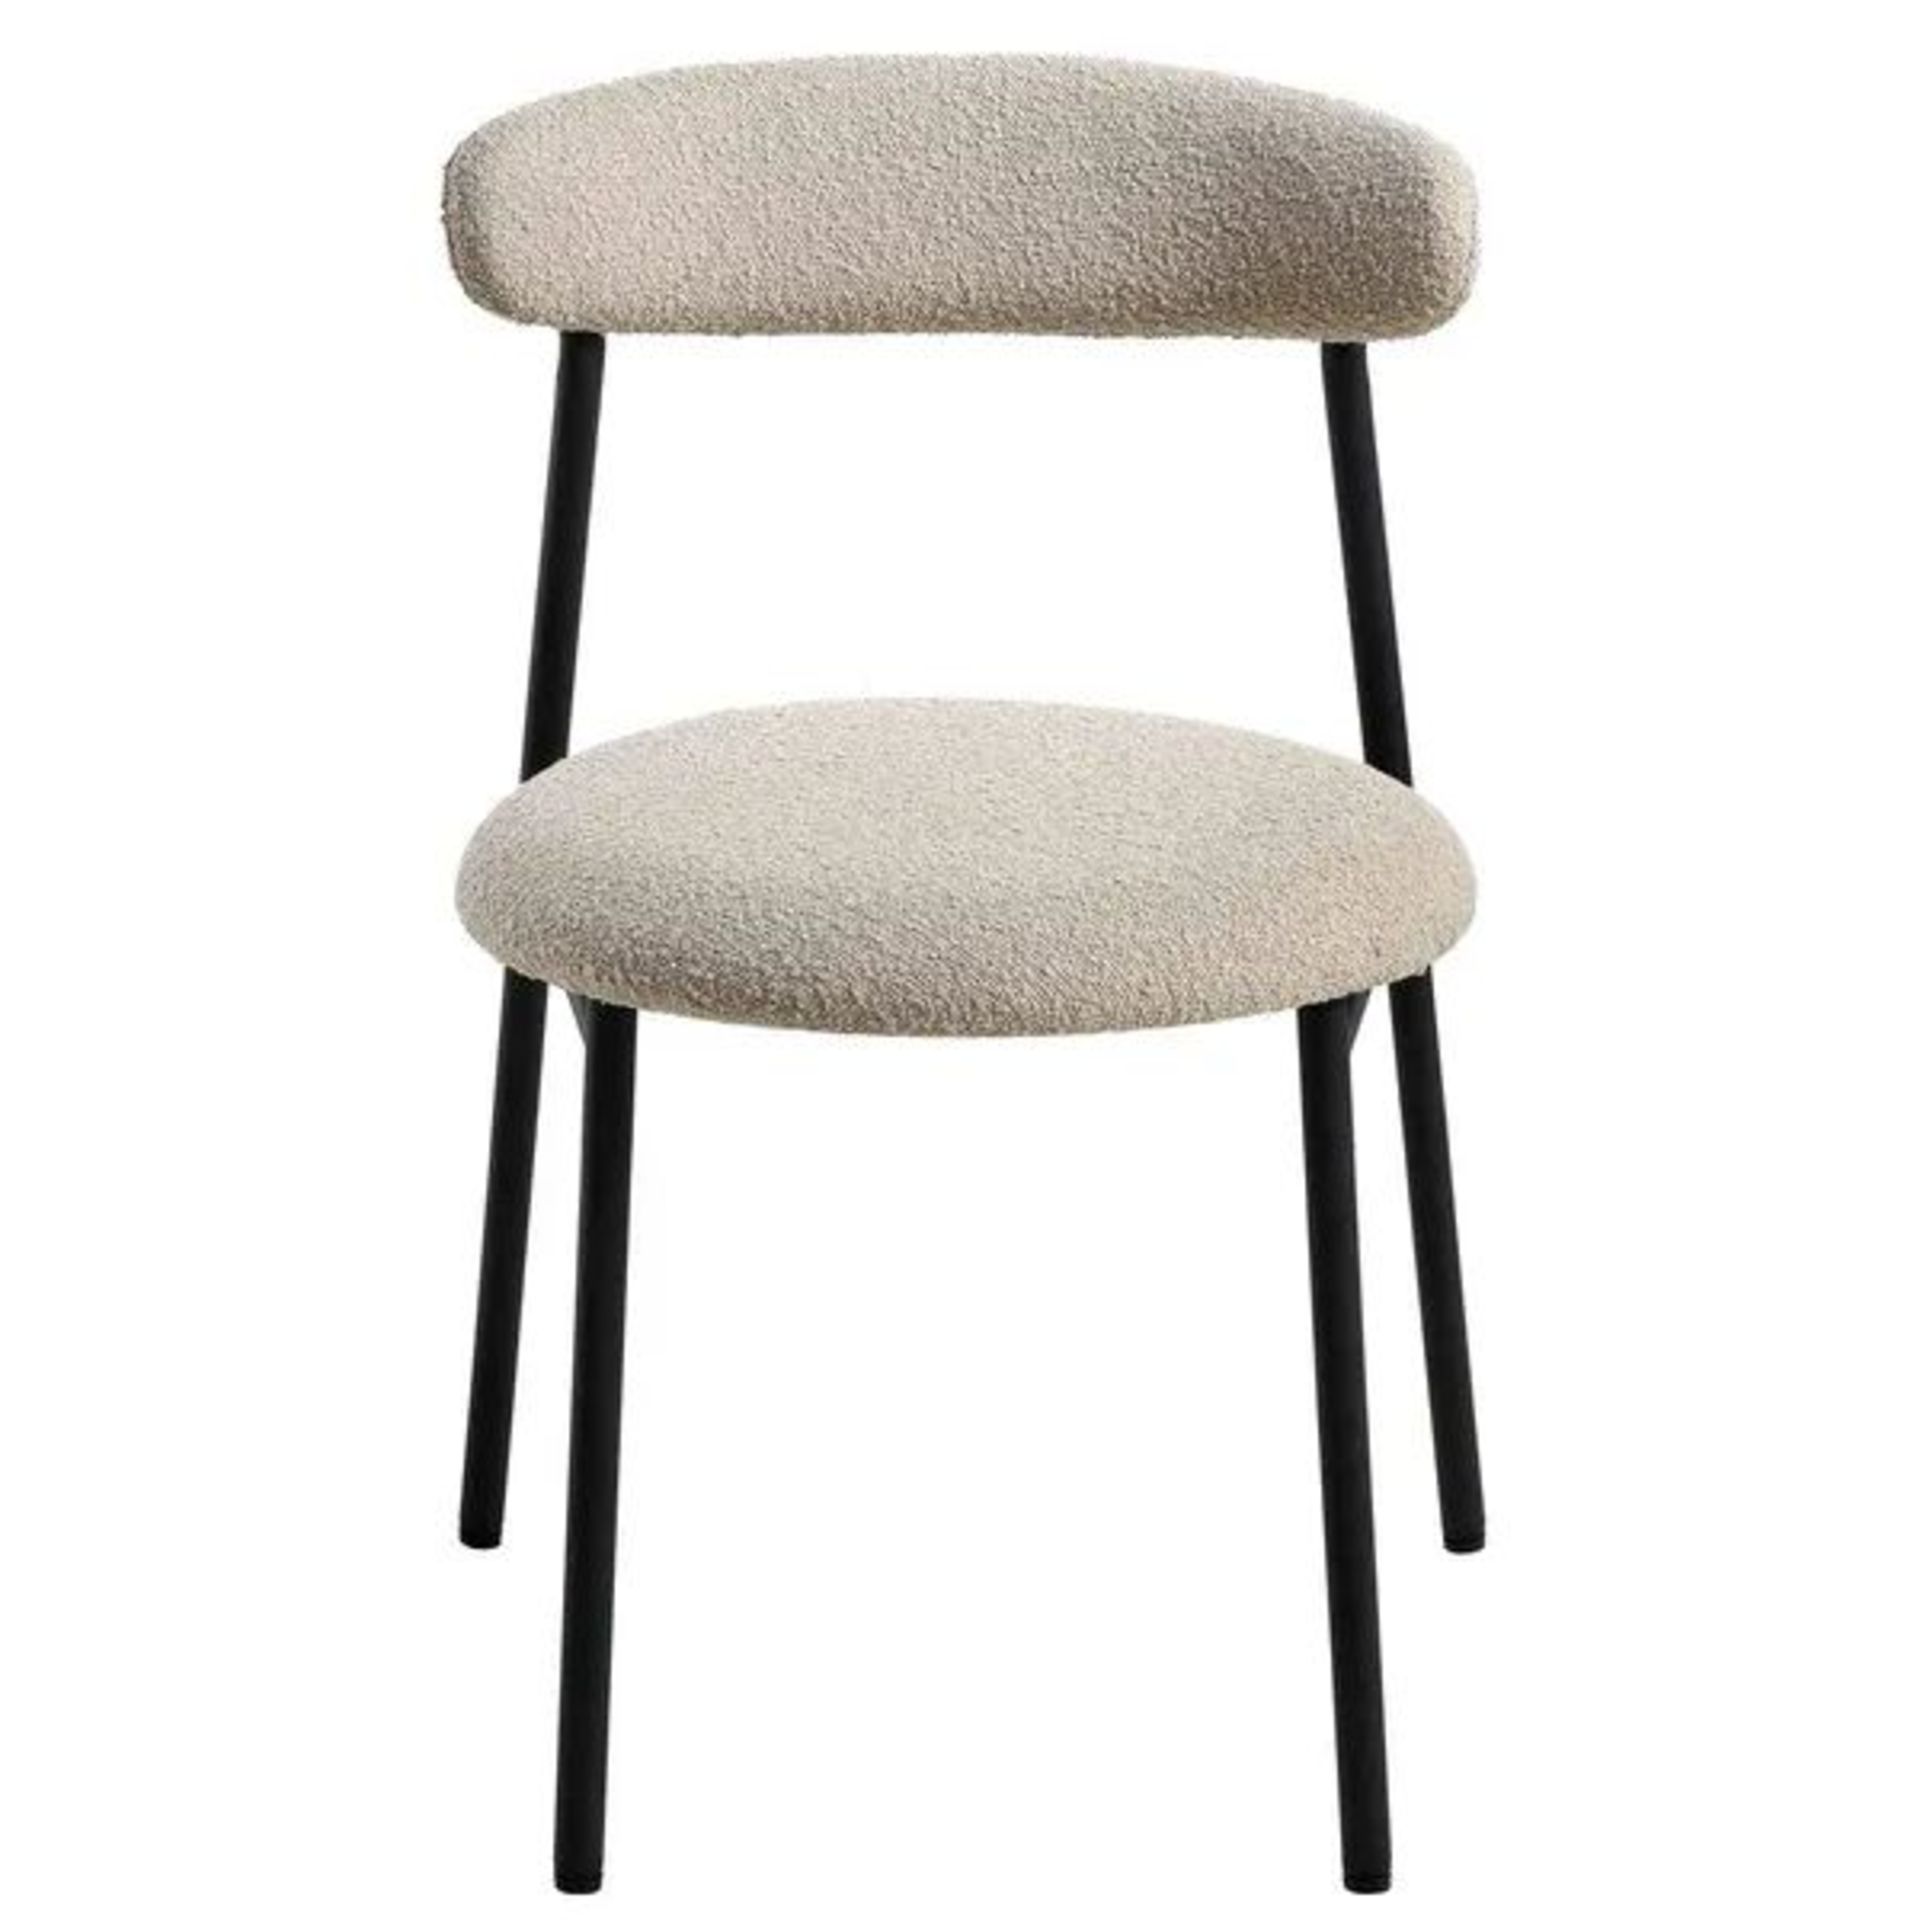 Donna Set of 2 Taupe Boucle Dining Chairs. - SR25. RRP £199.99. The ultra-slim black metal legs